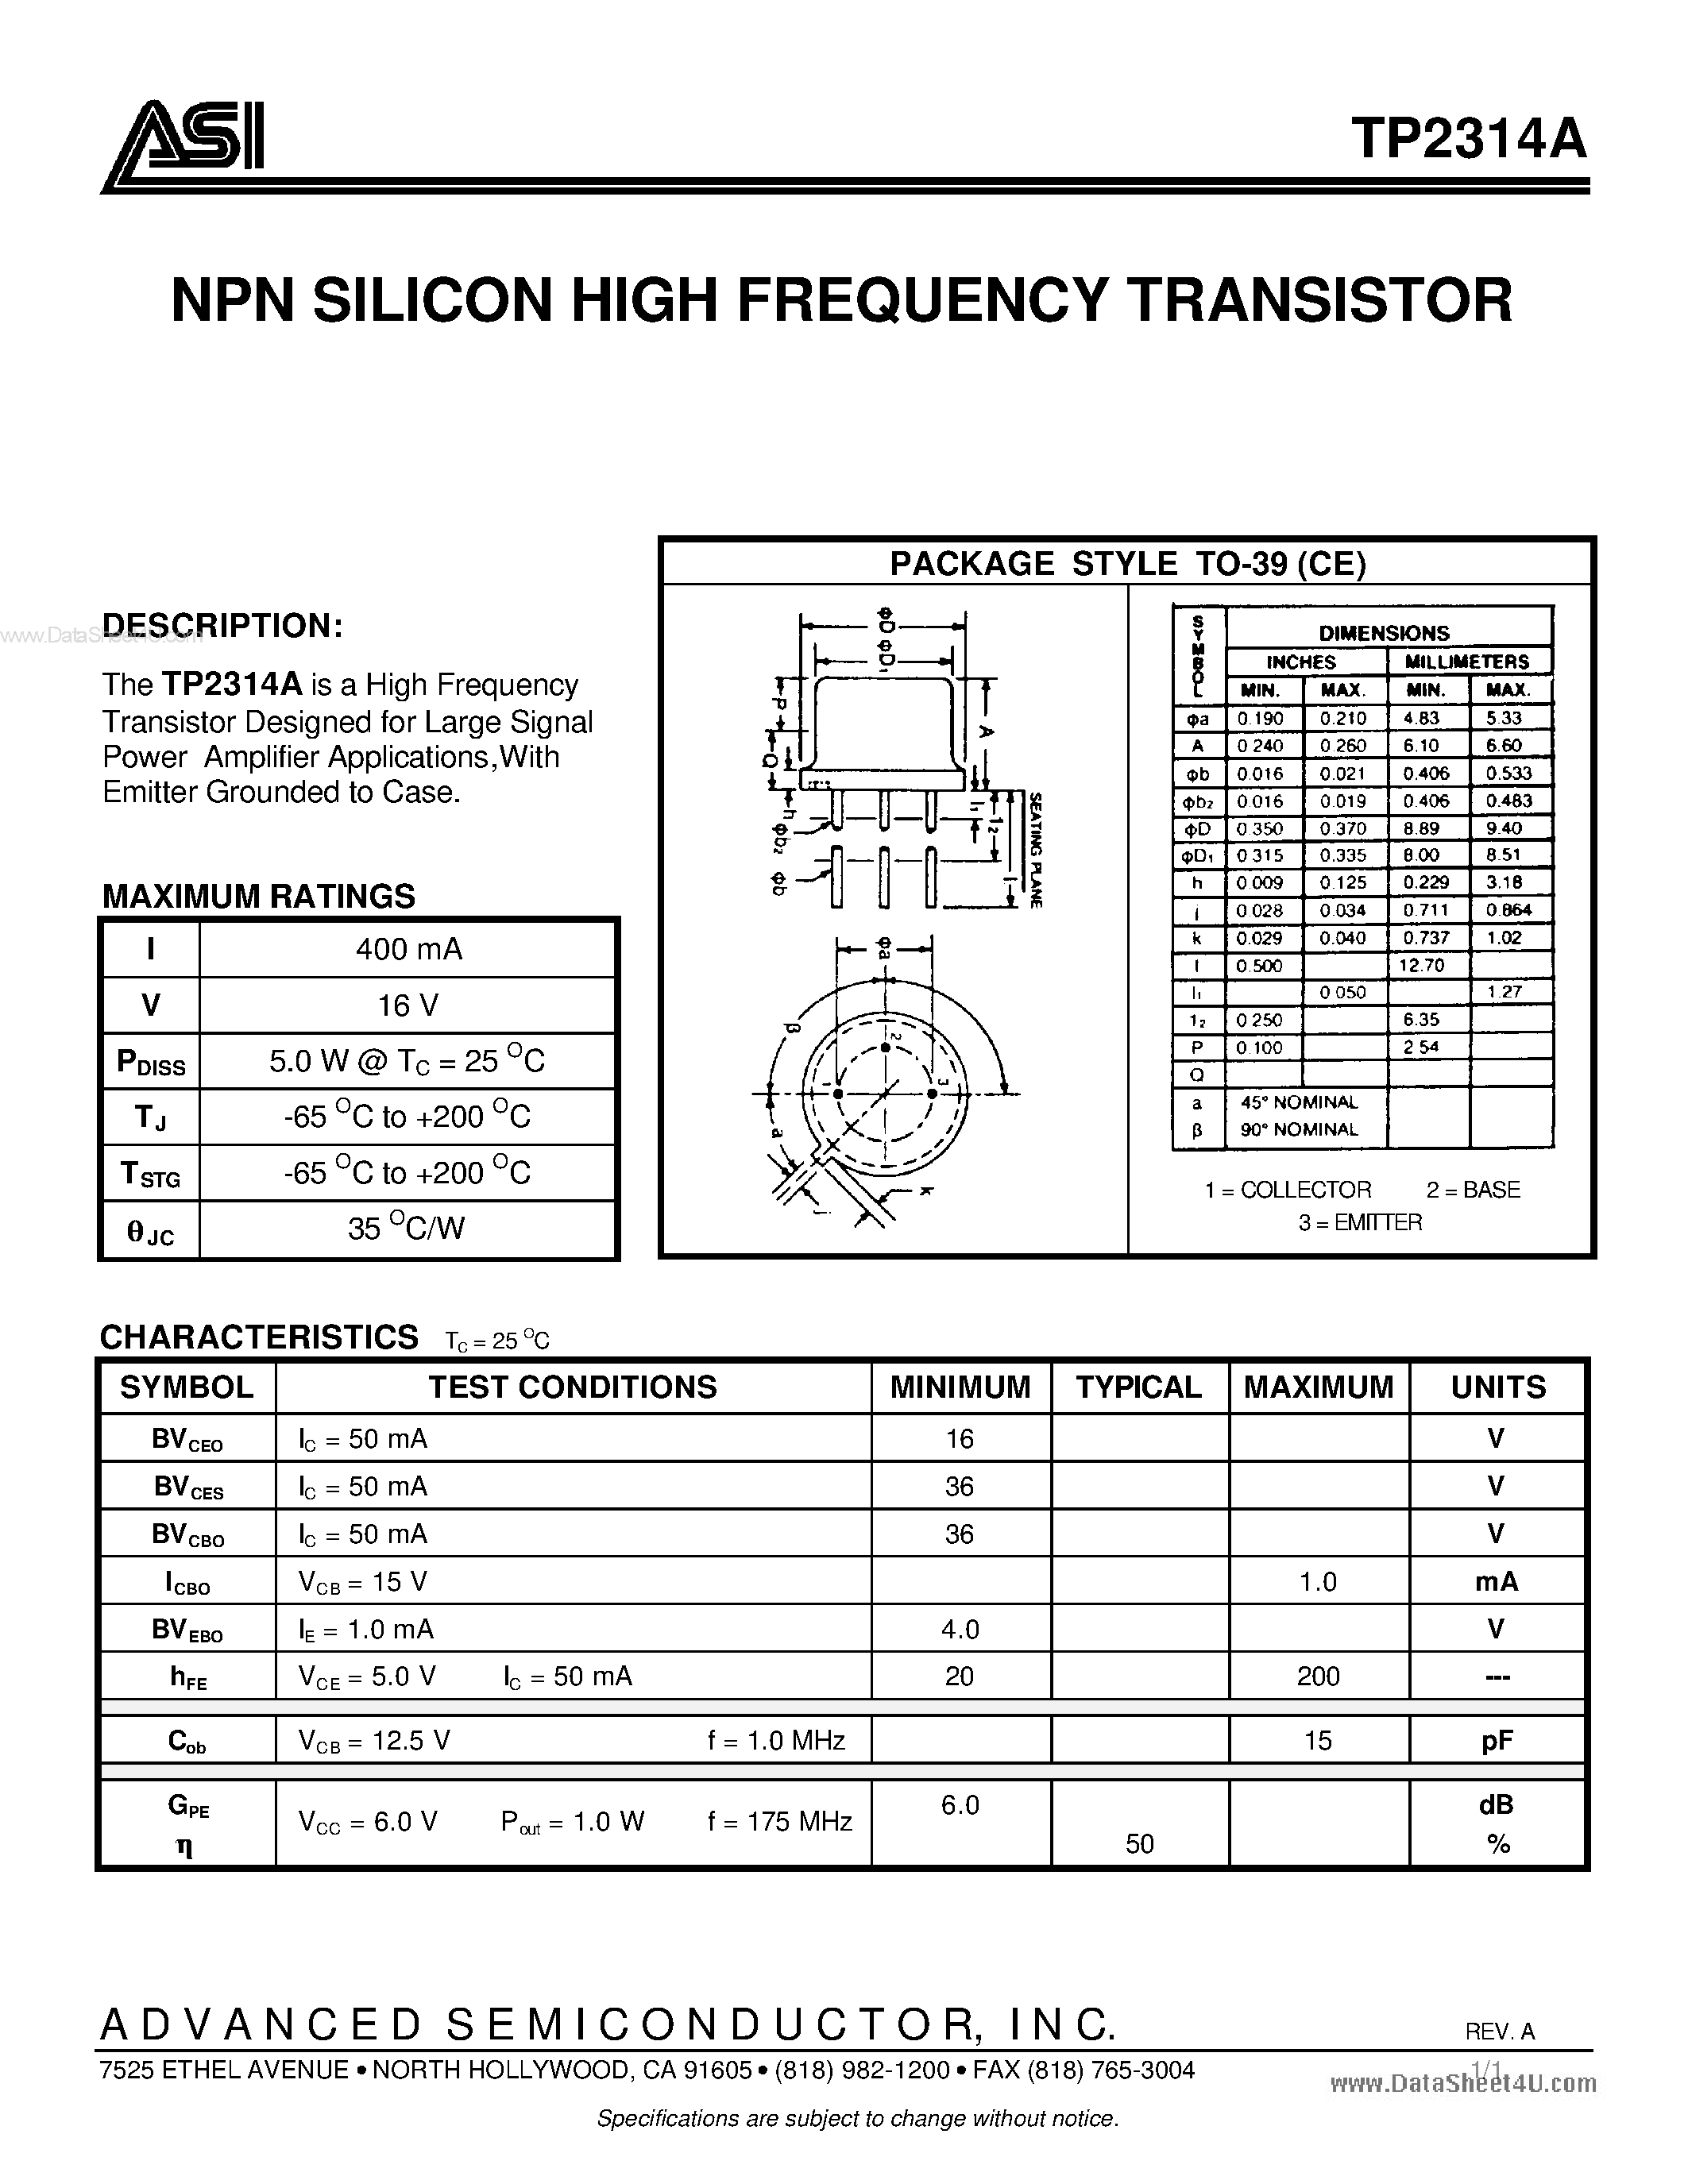 Datasheet TP2314A - NPN SILICON HIGH FREQUENCY TRANSISTOR page 1